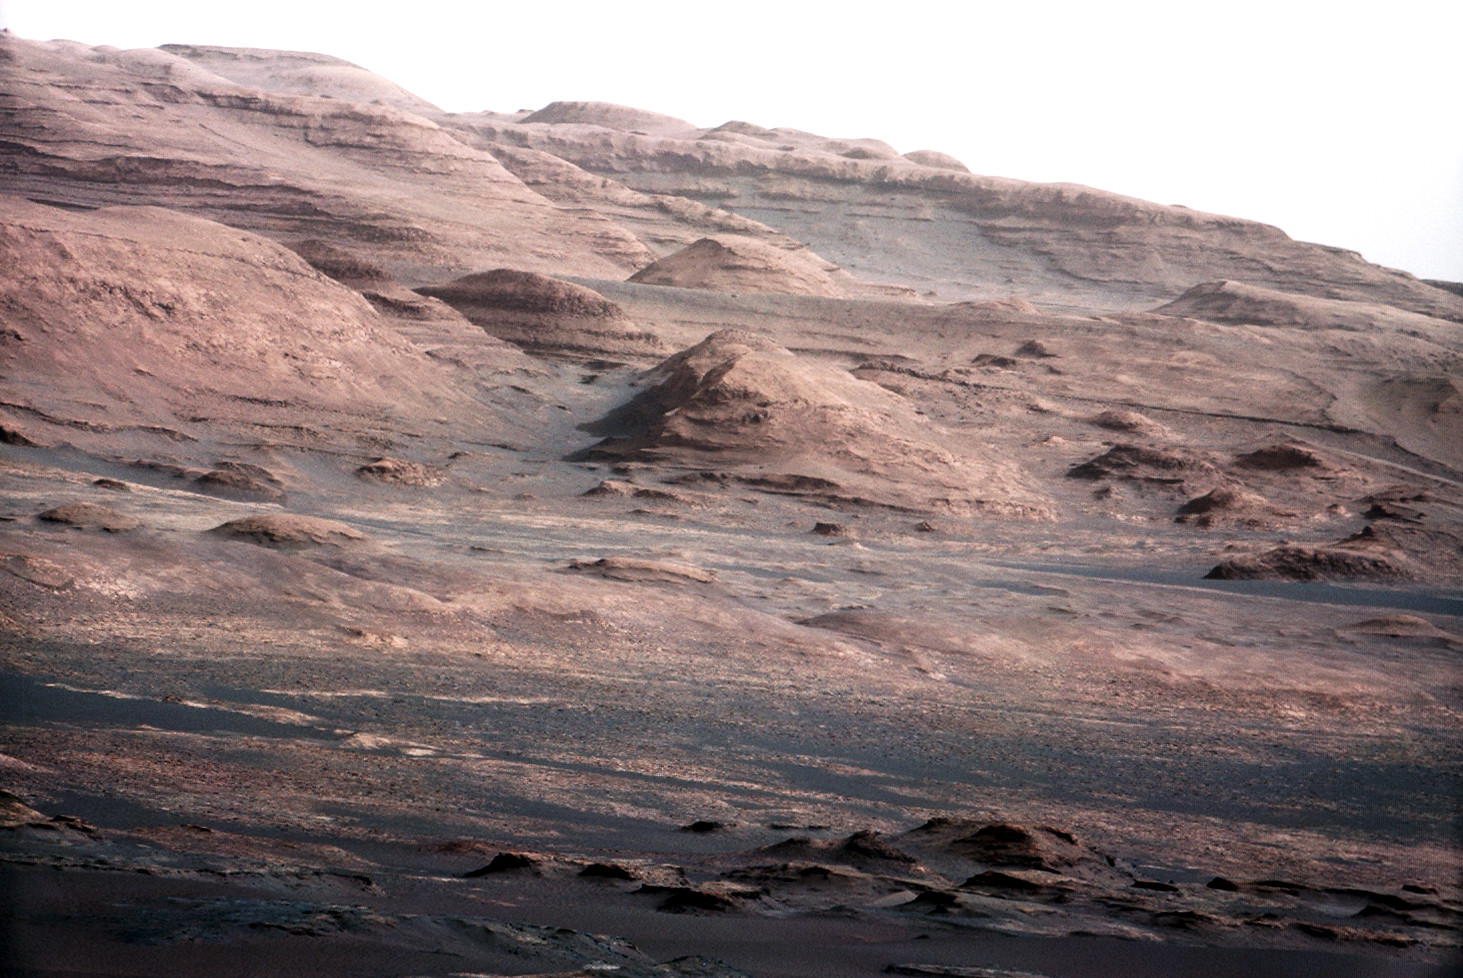 Mars shot from the Curiosity Rover